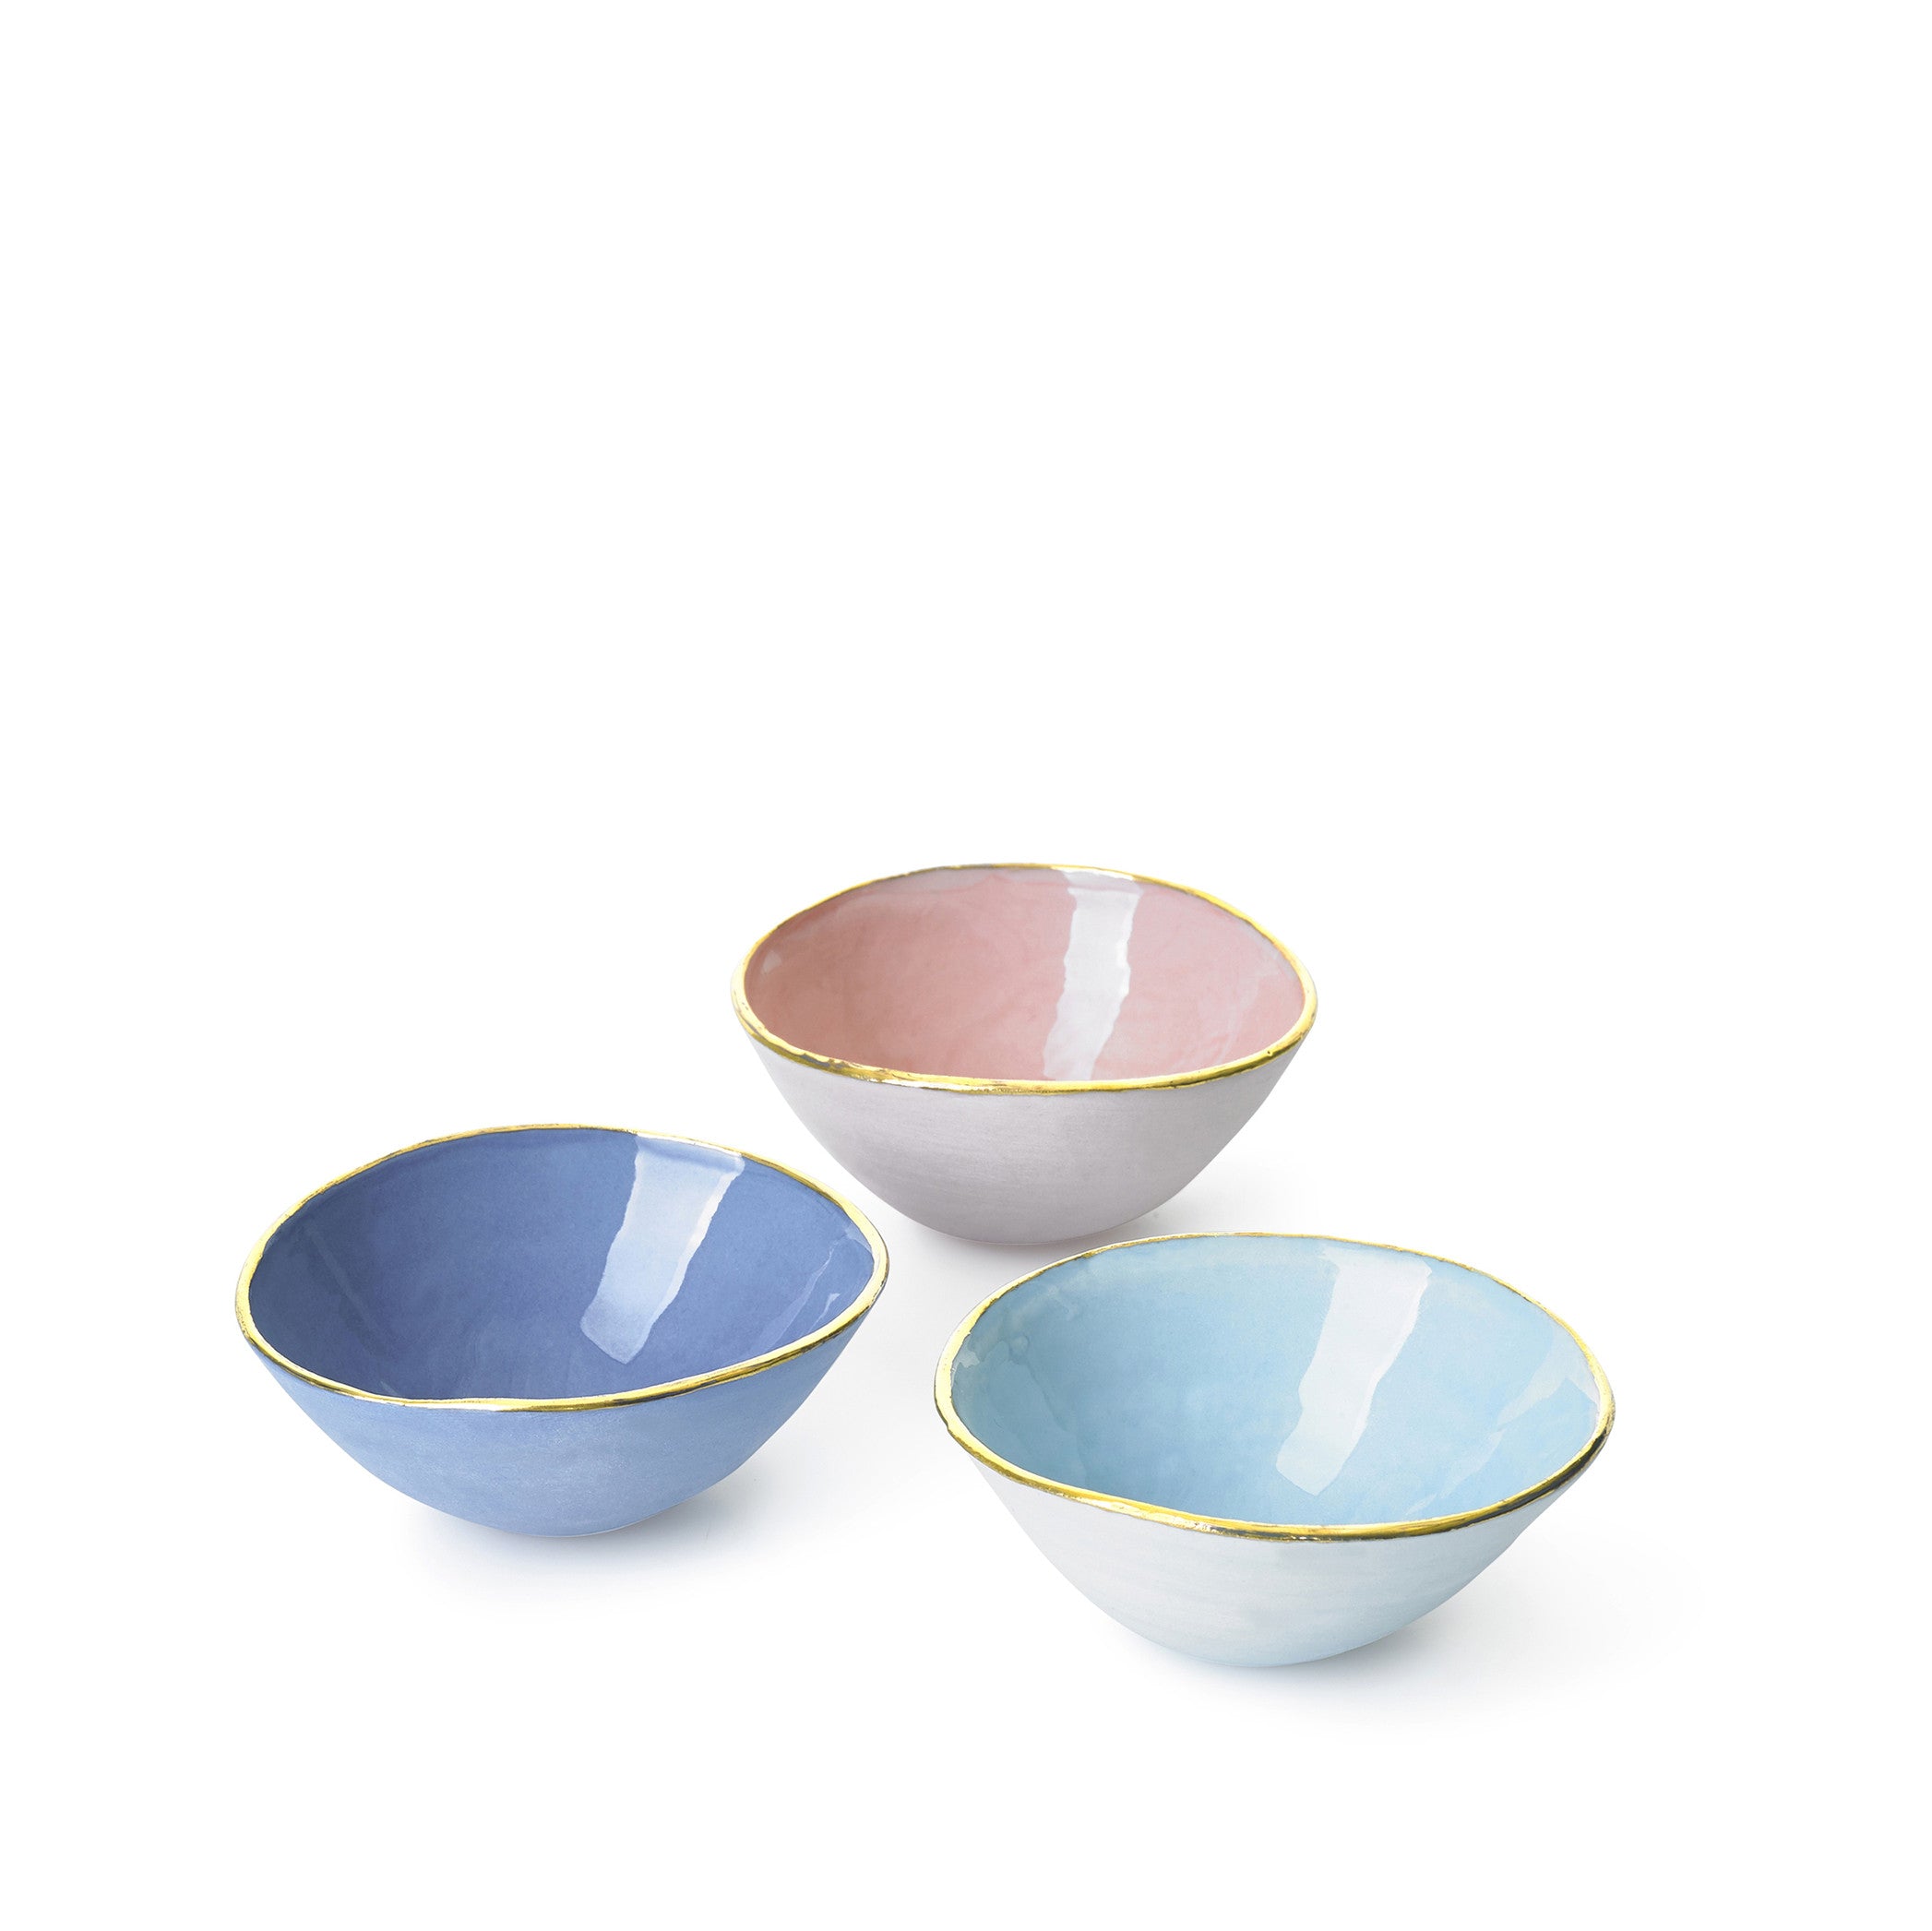 Small Pink Ceramic Bowl with Gold Rim, 6cm